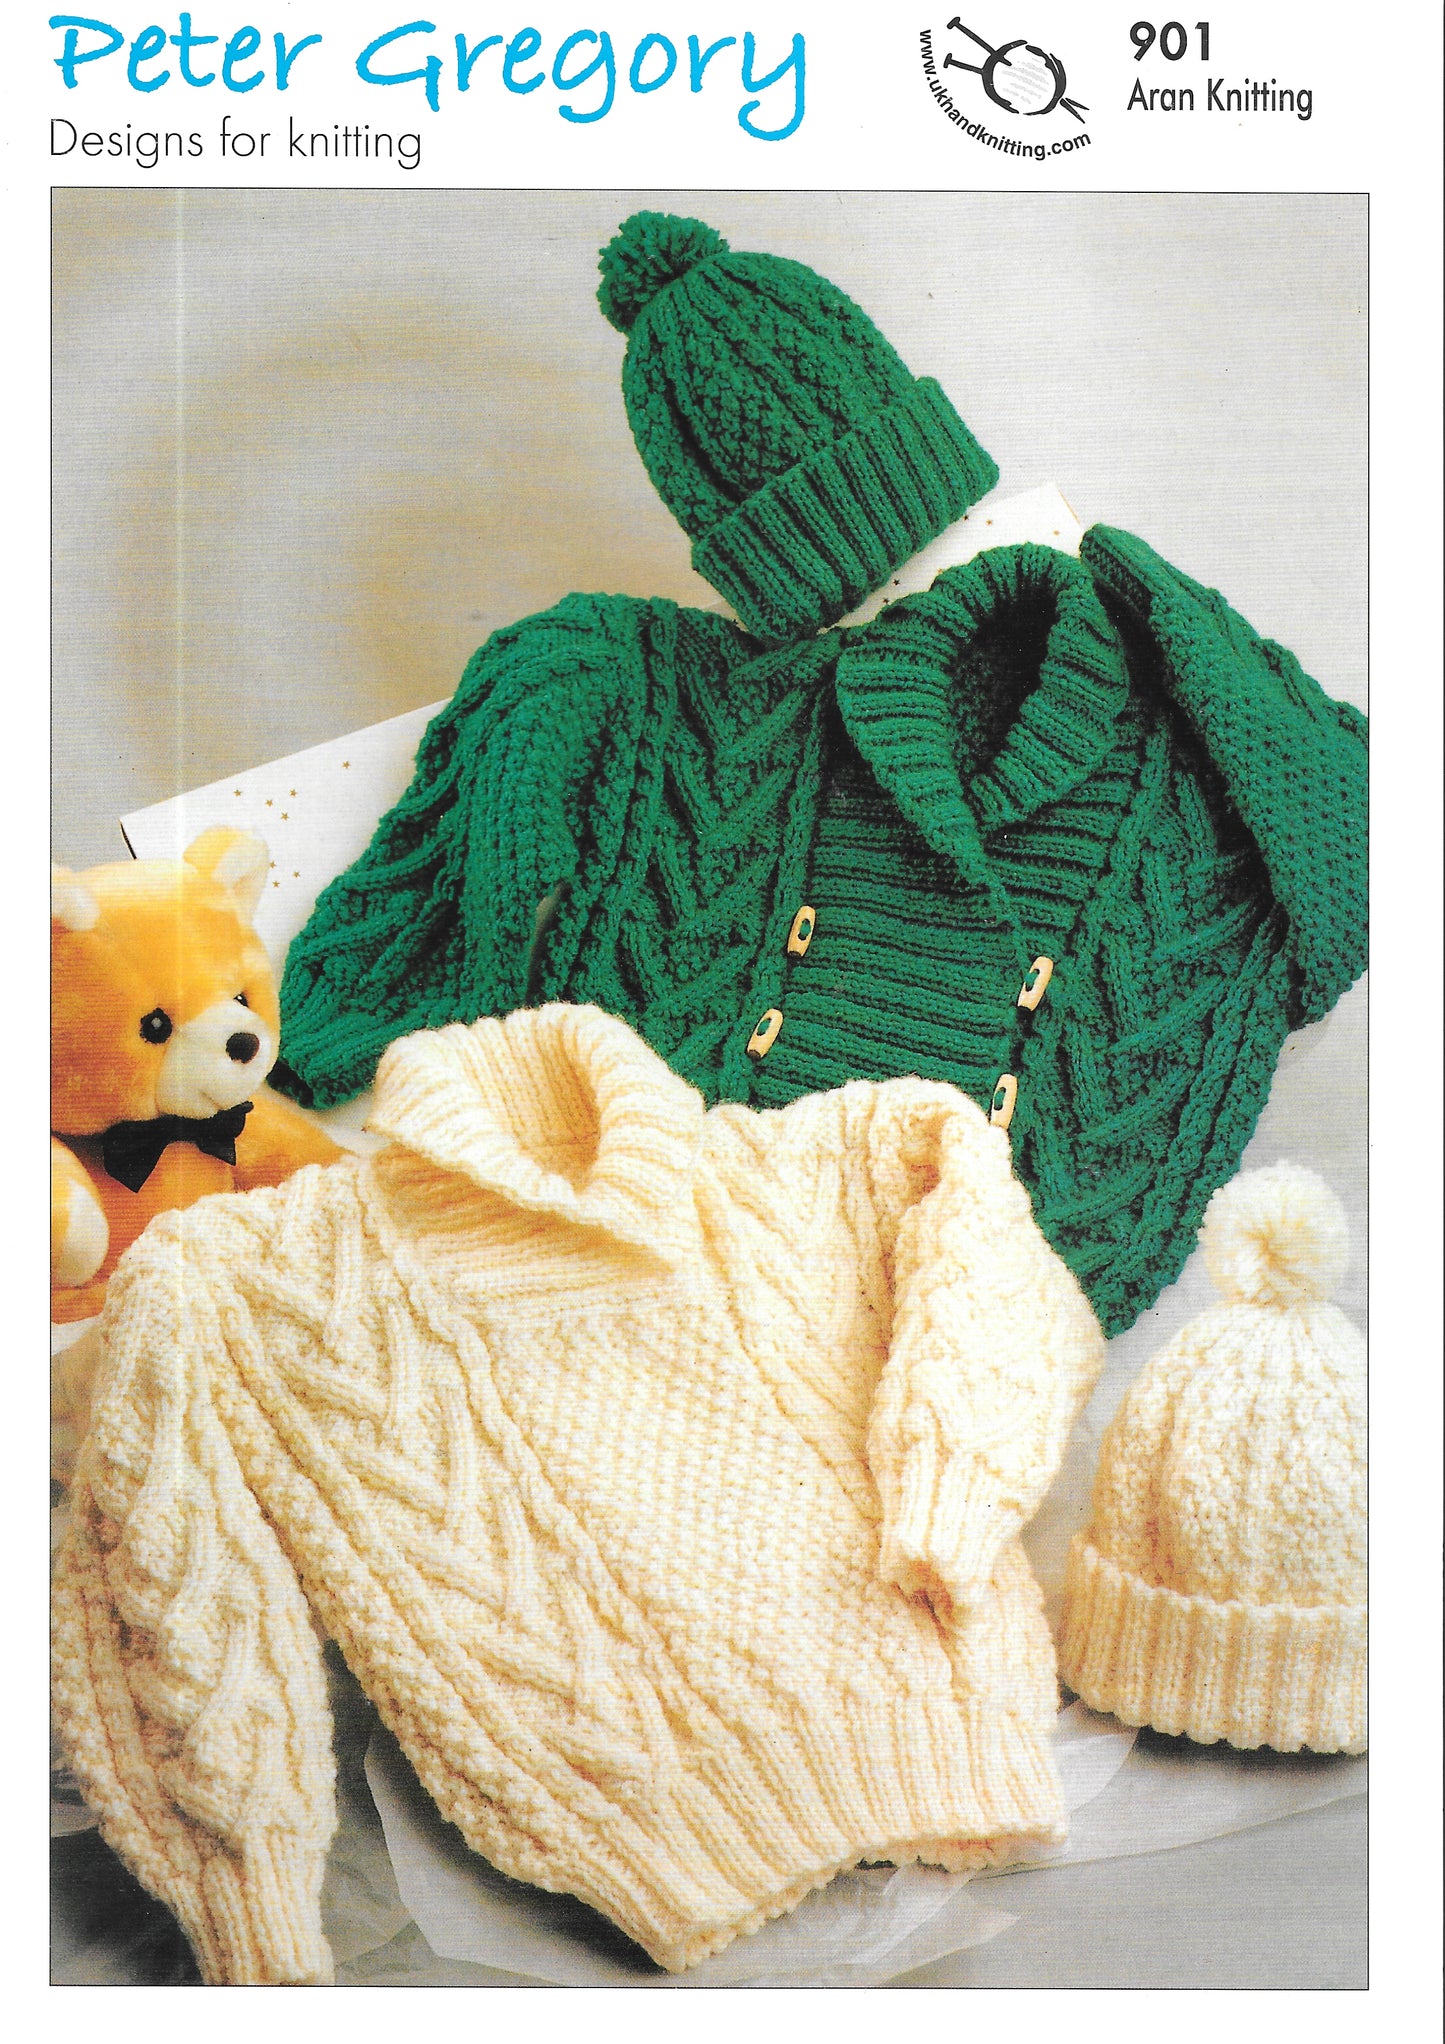 901 Peter Gregory knitting pattern. Child's cardigans/sweaters.  Aran